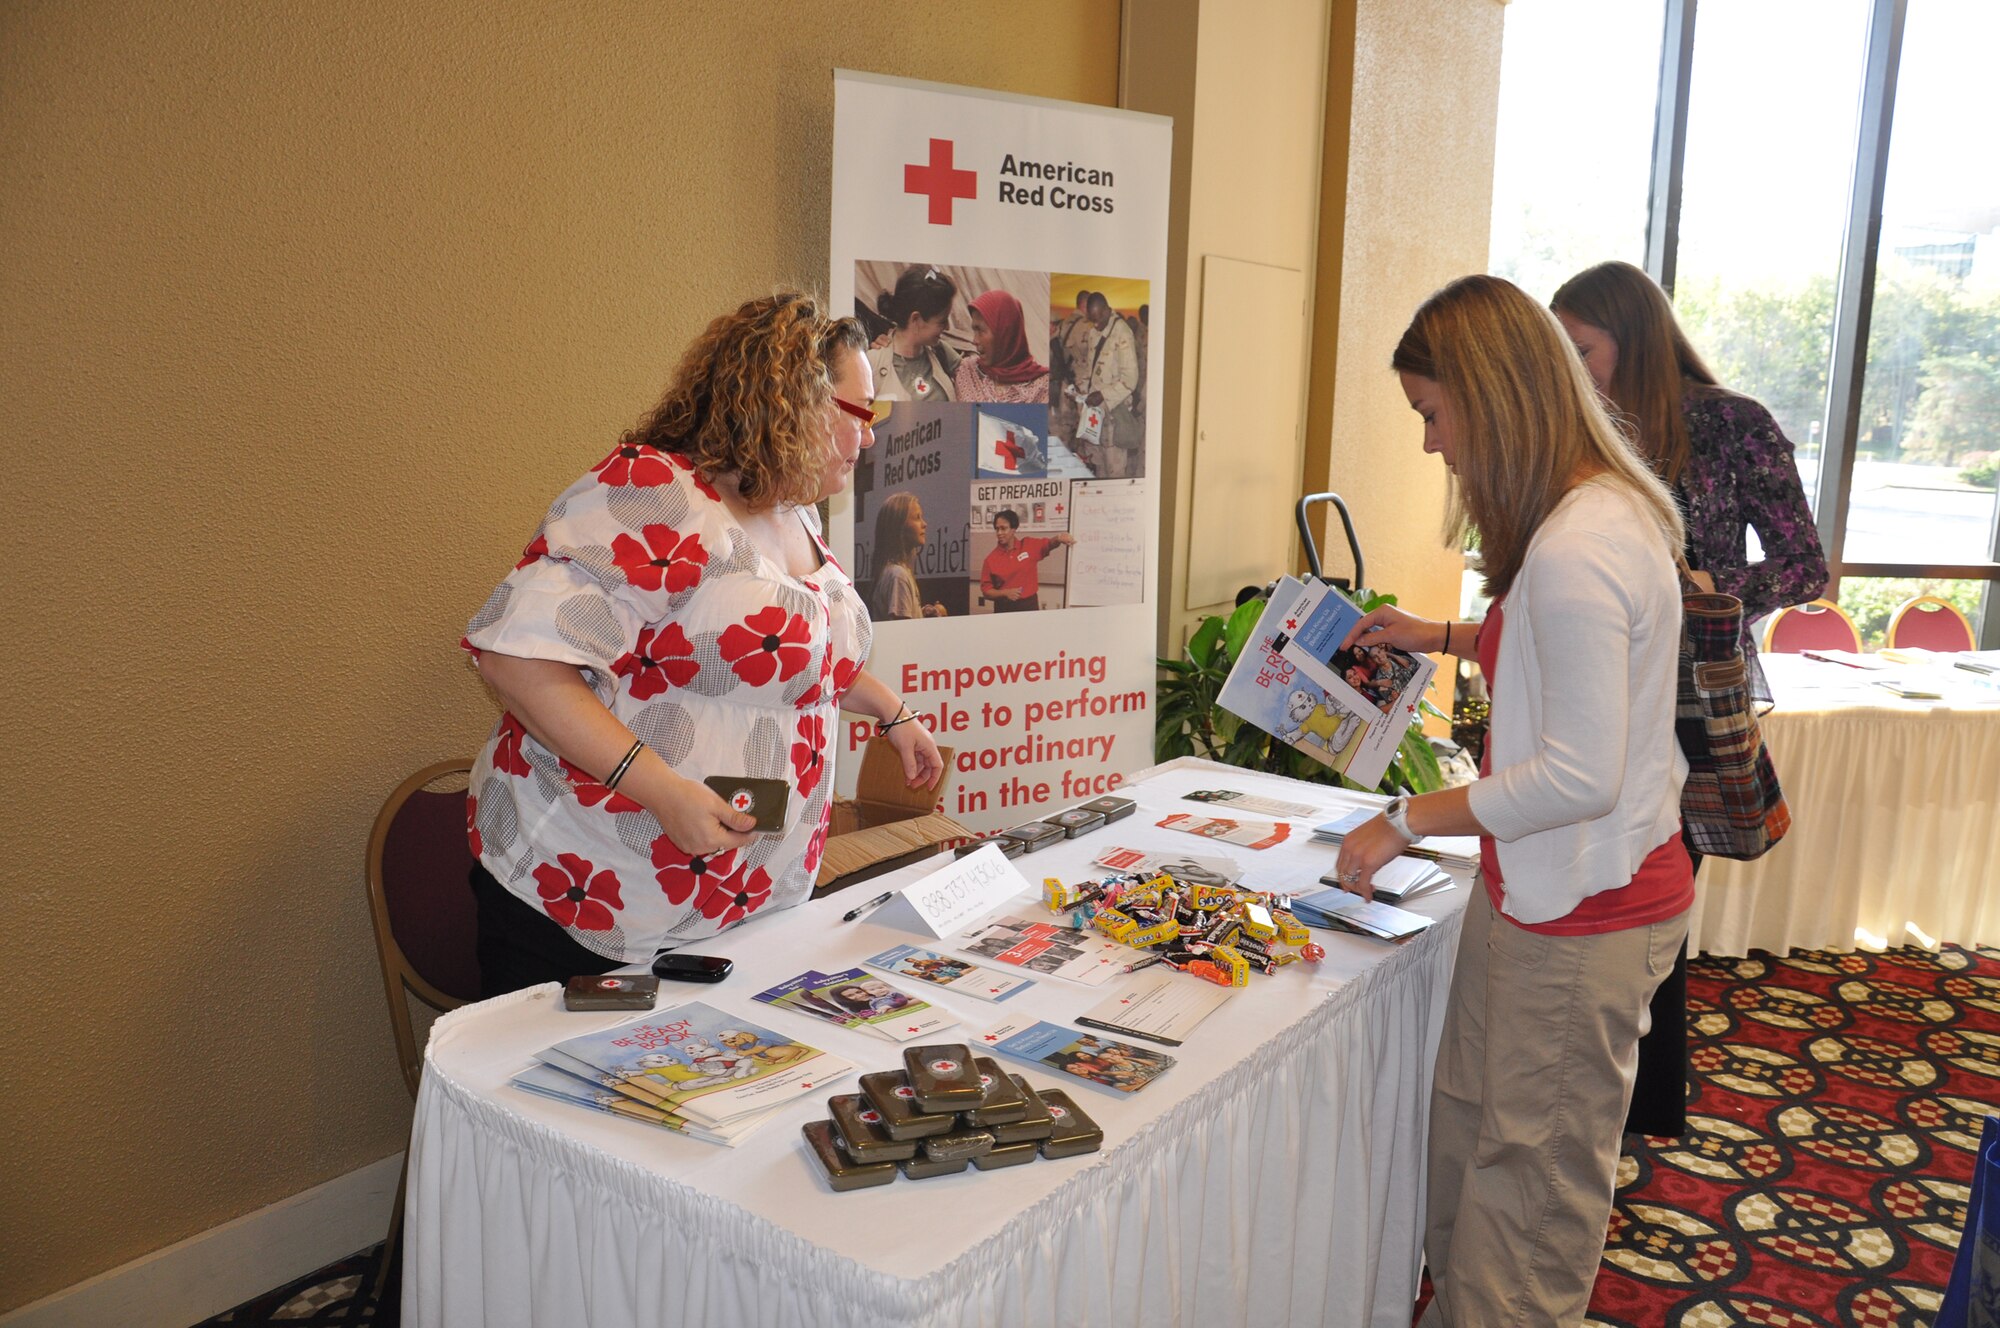 WRIGHT-PATTERSON AIR FORCE BASE, Ohio – Nearly 100 reservists and their families had the opportunity to speak with representatives from the Red Cross and other organizations during the Yellow Ribbon event held Sept. 24-26 at the Crowne Plaza Hotel in Dublin, Ohio. (U.S. Air Force photo/Senior Airman Matthew Cook)